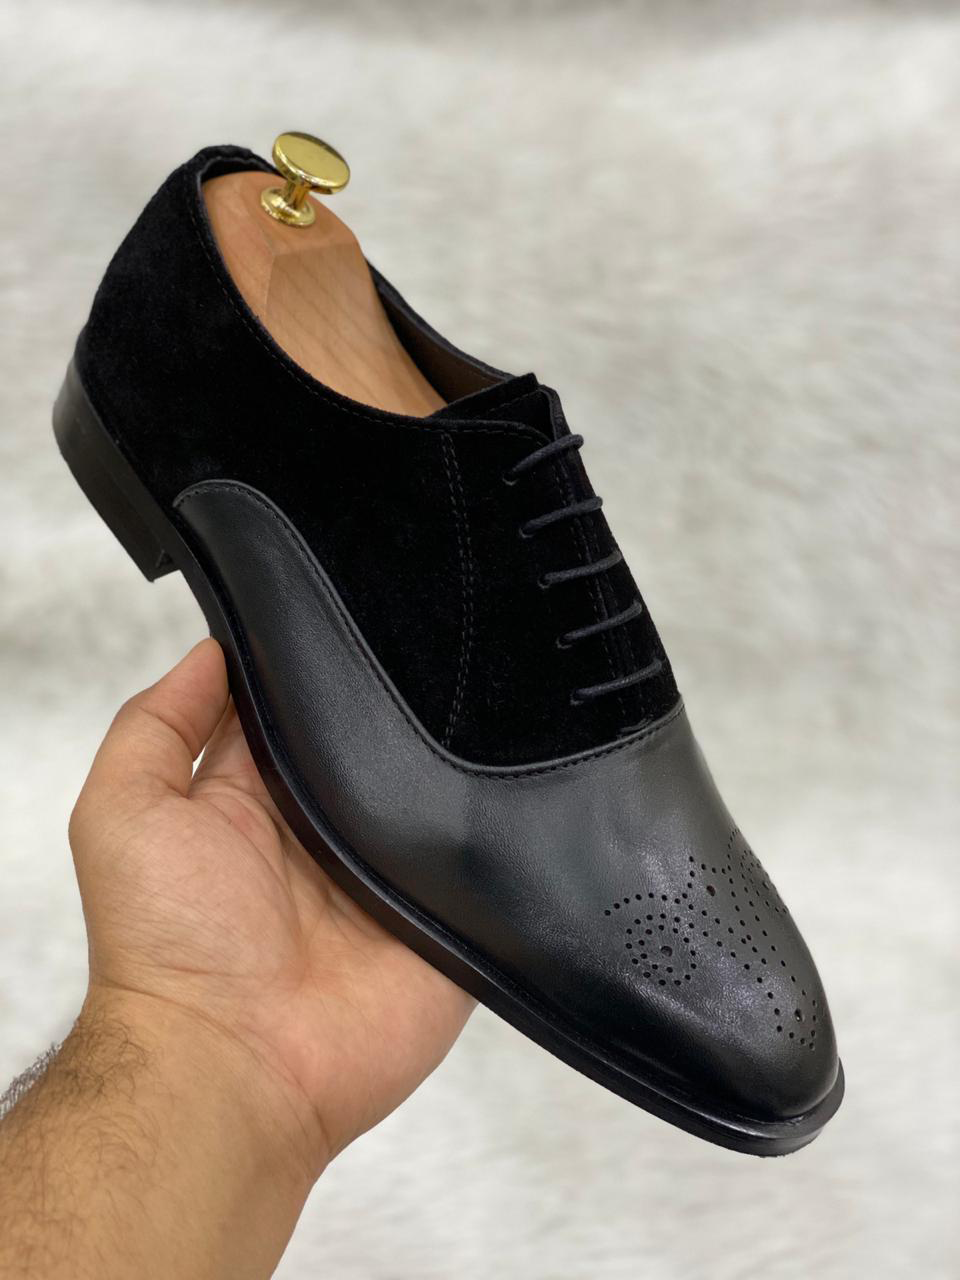 Premium Quality Leather Formal Shoes For Men-Unique and Classy